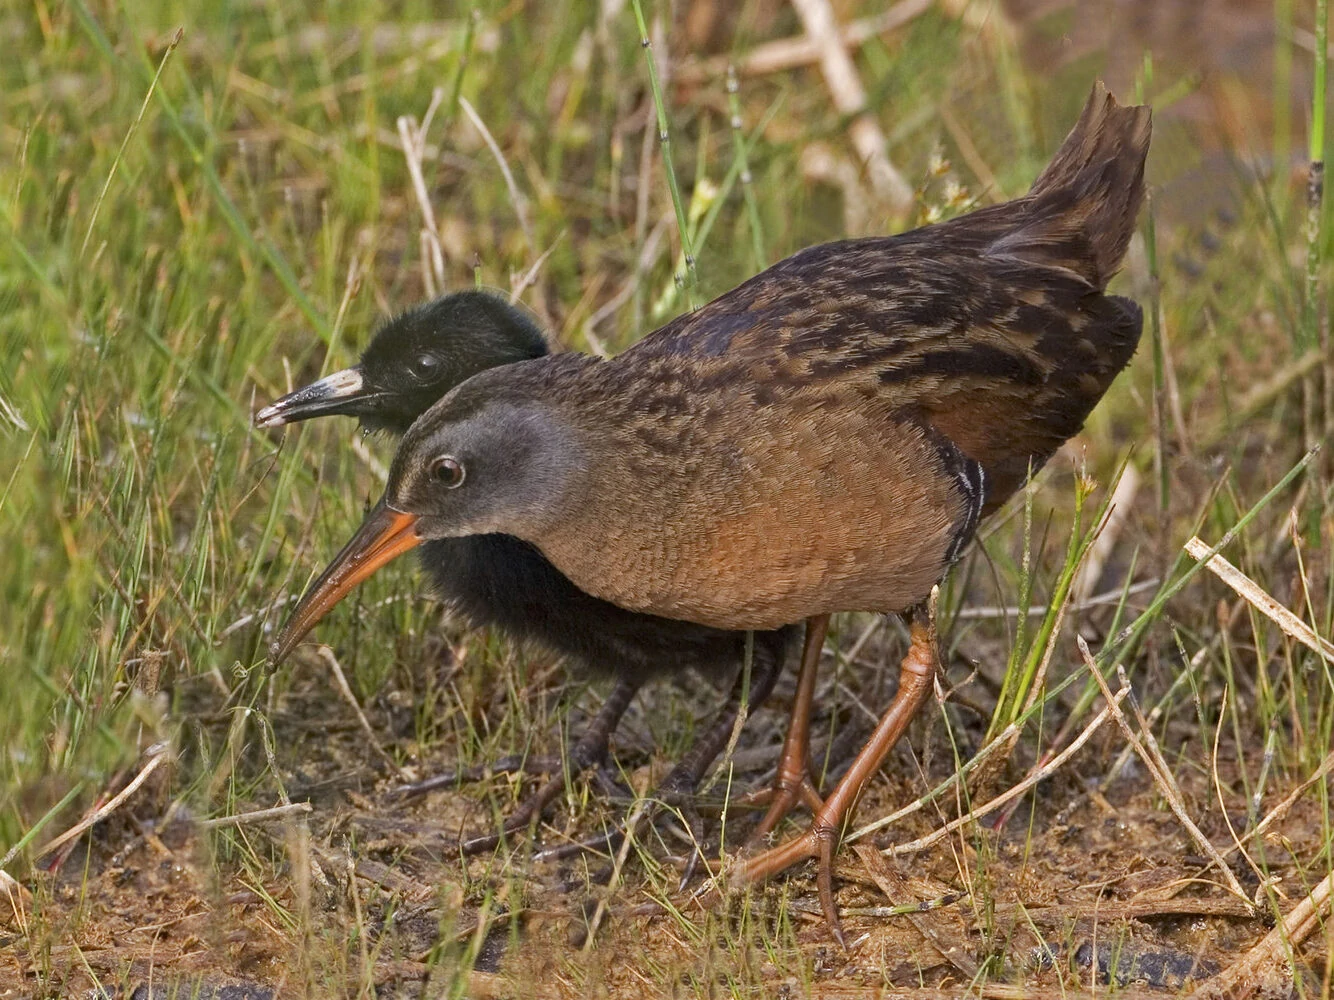 An Adult and chick, Virginia Rail, Rallus limicola